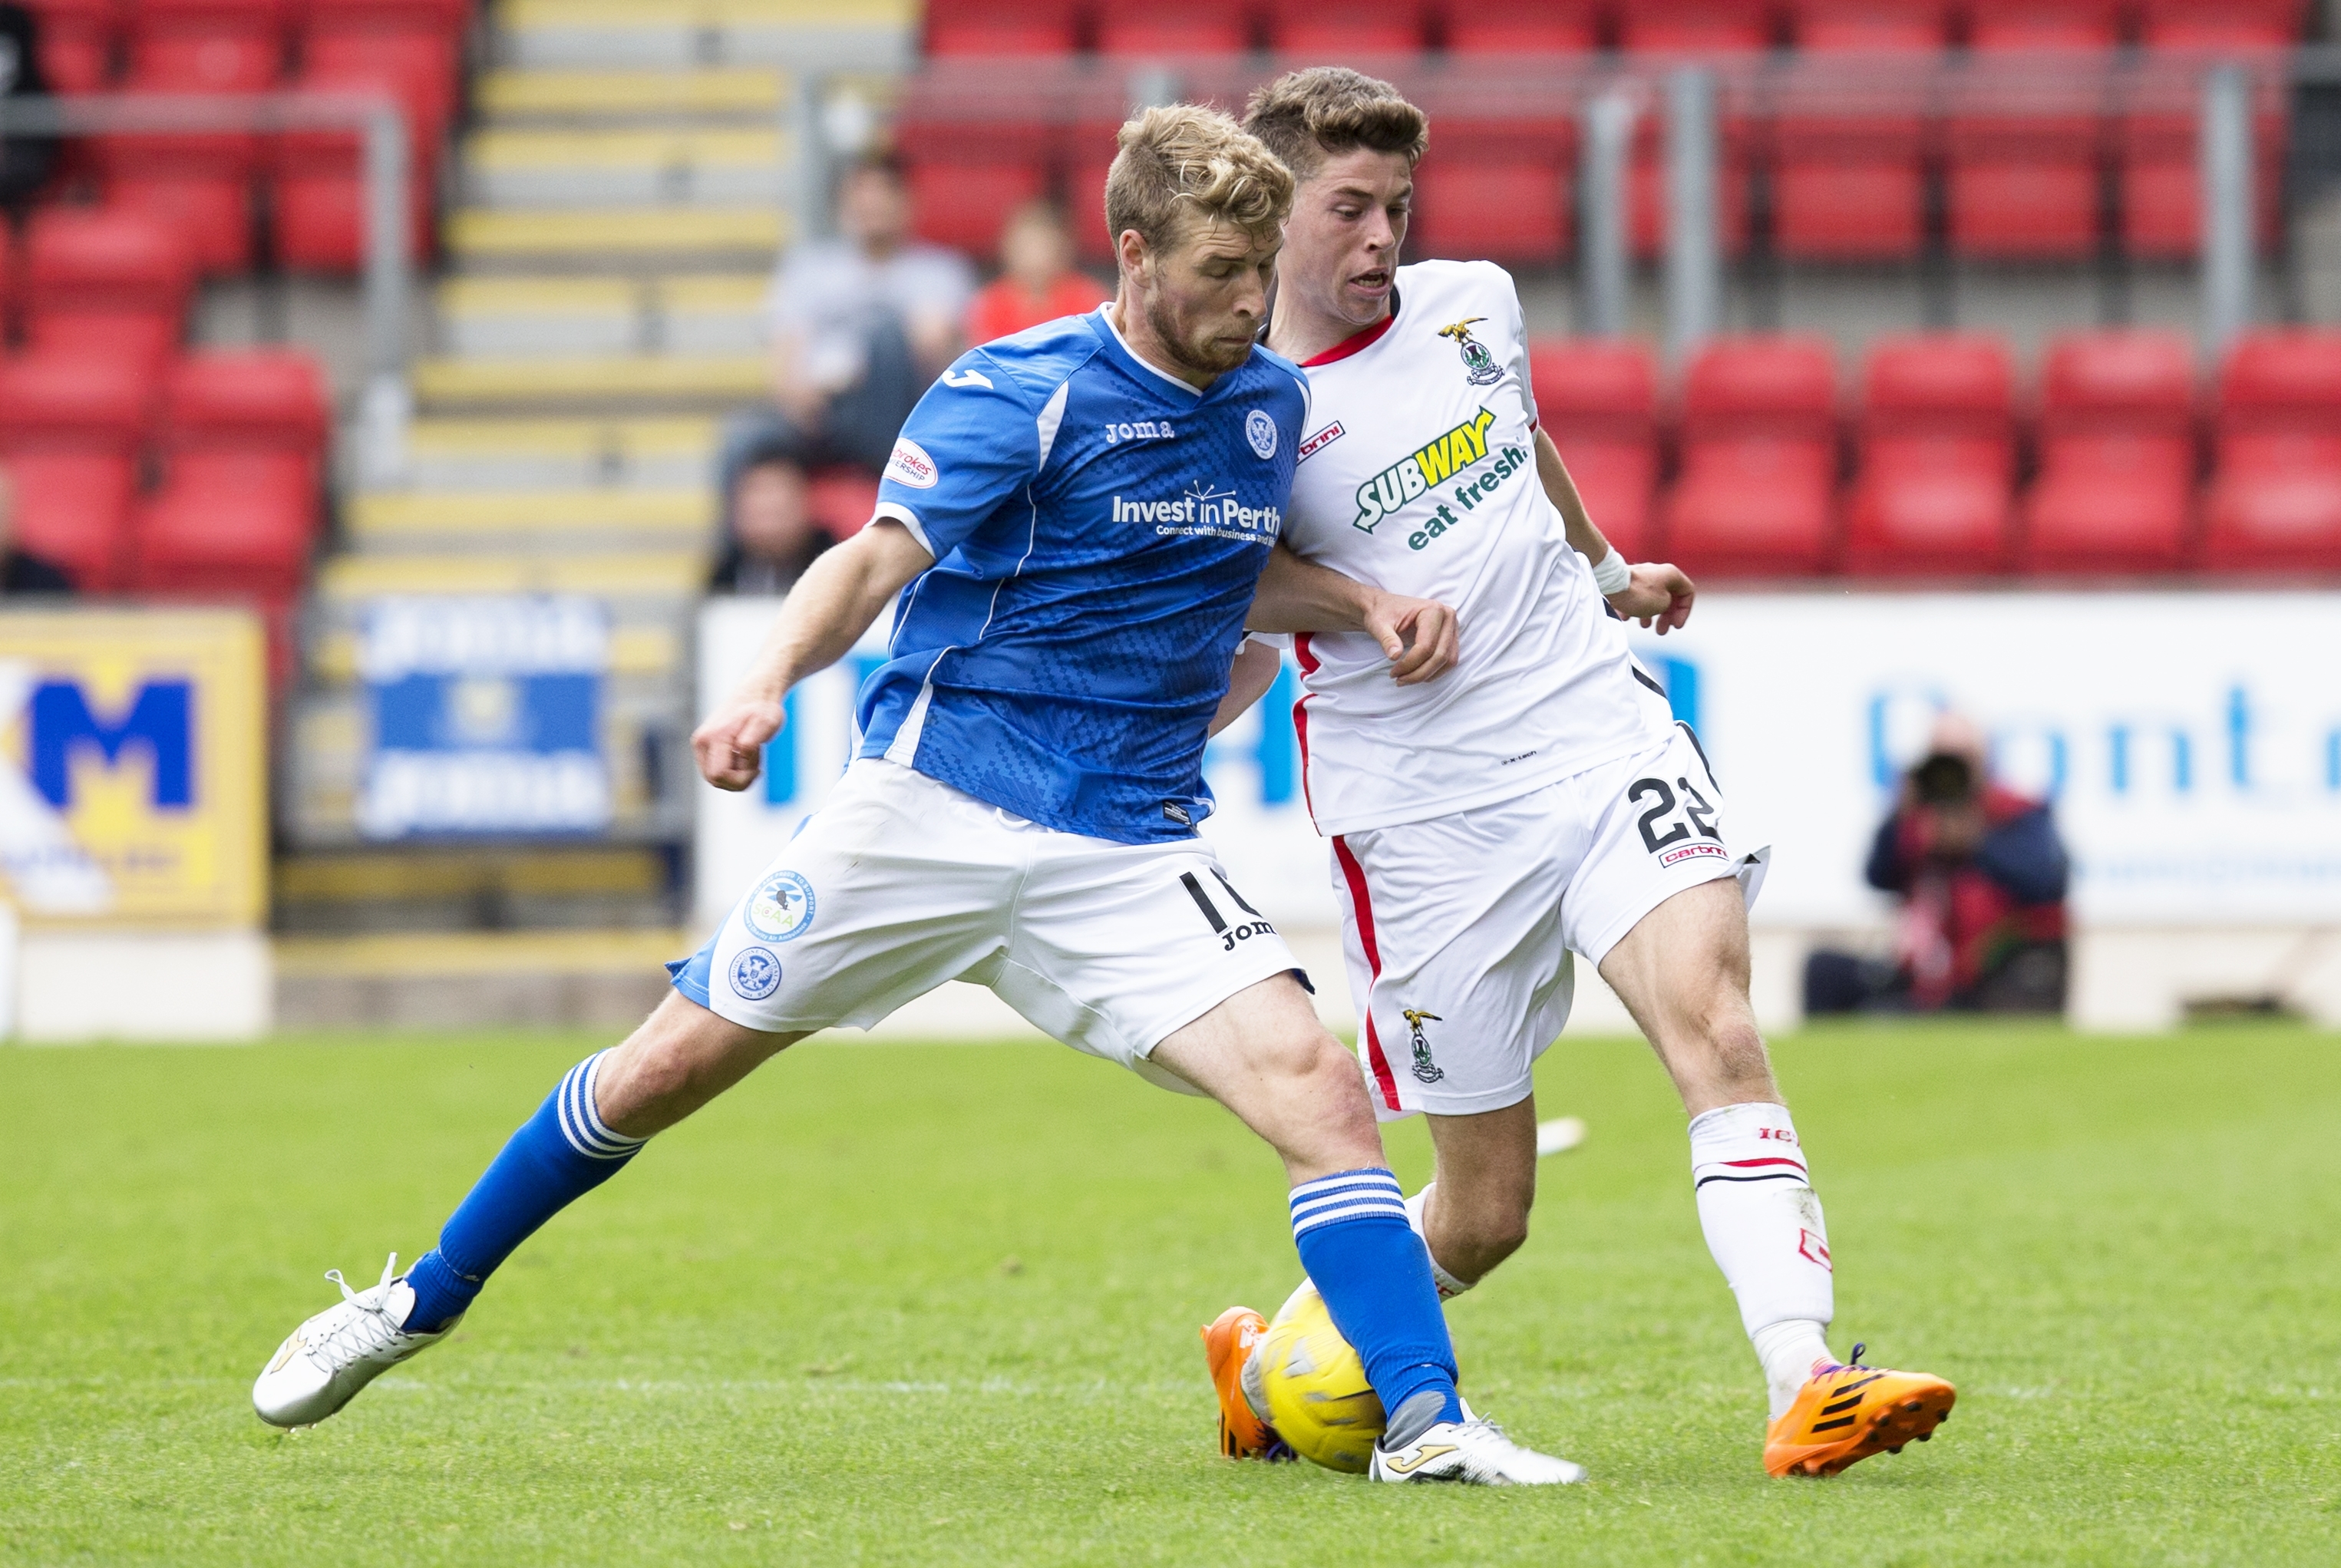 St Johnstone's David Wotherspoon tussles for the ball with Ryan Christie